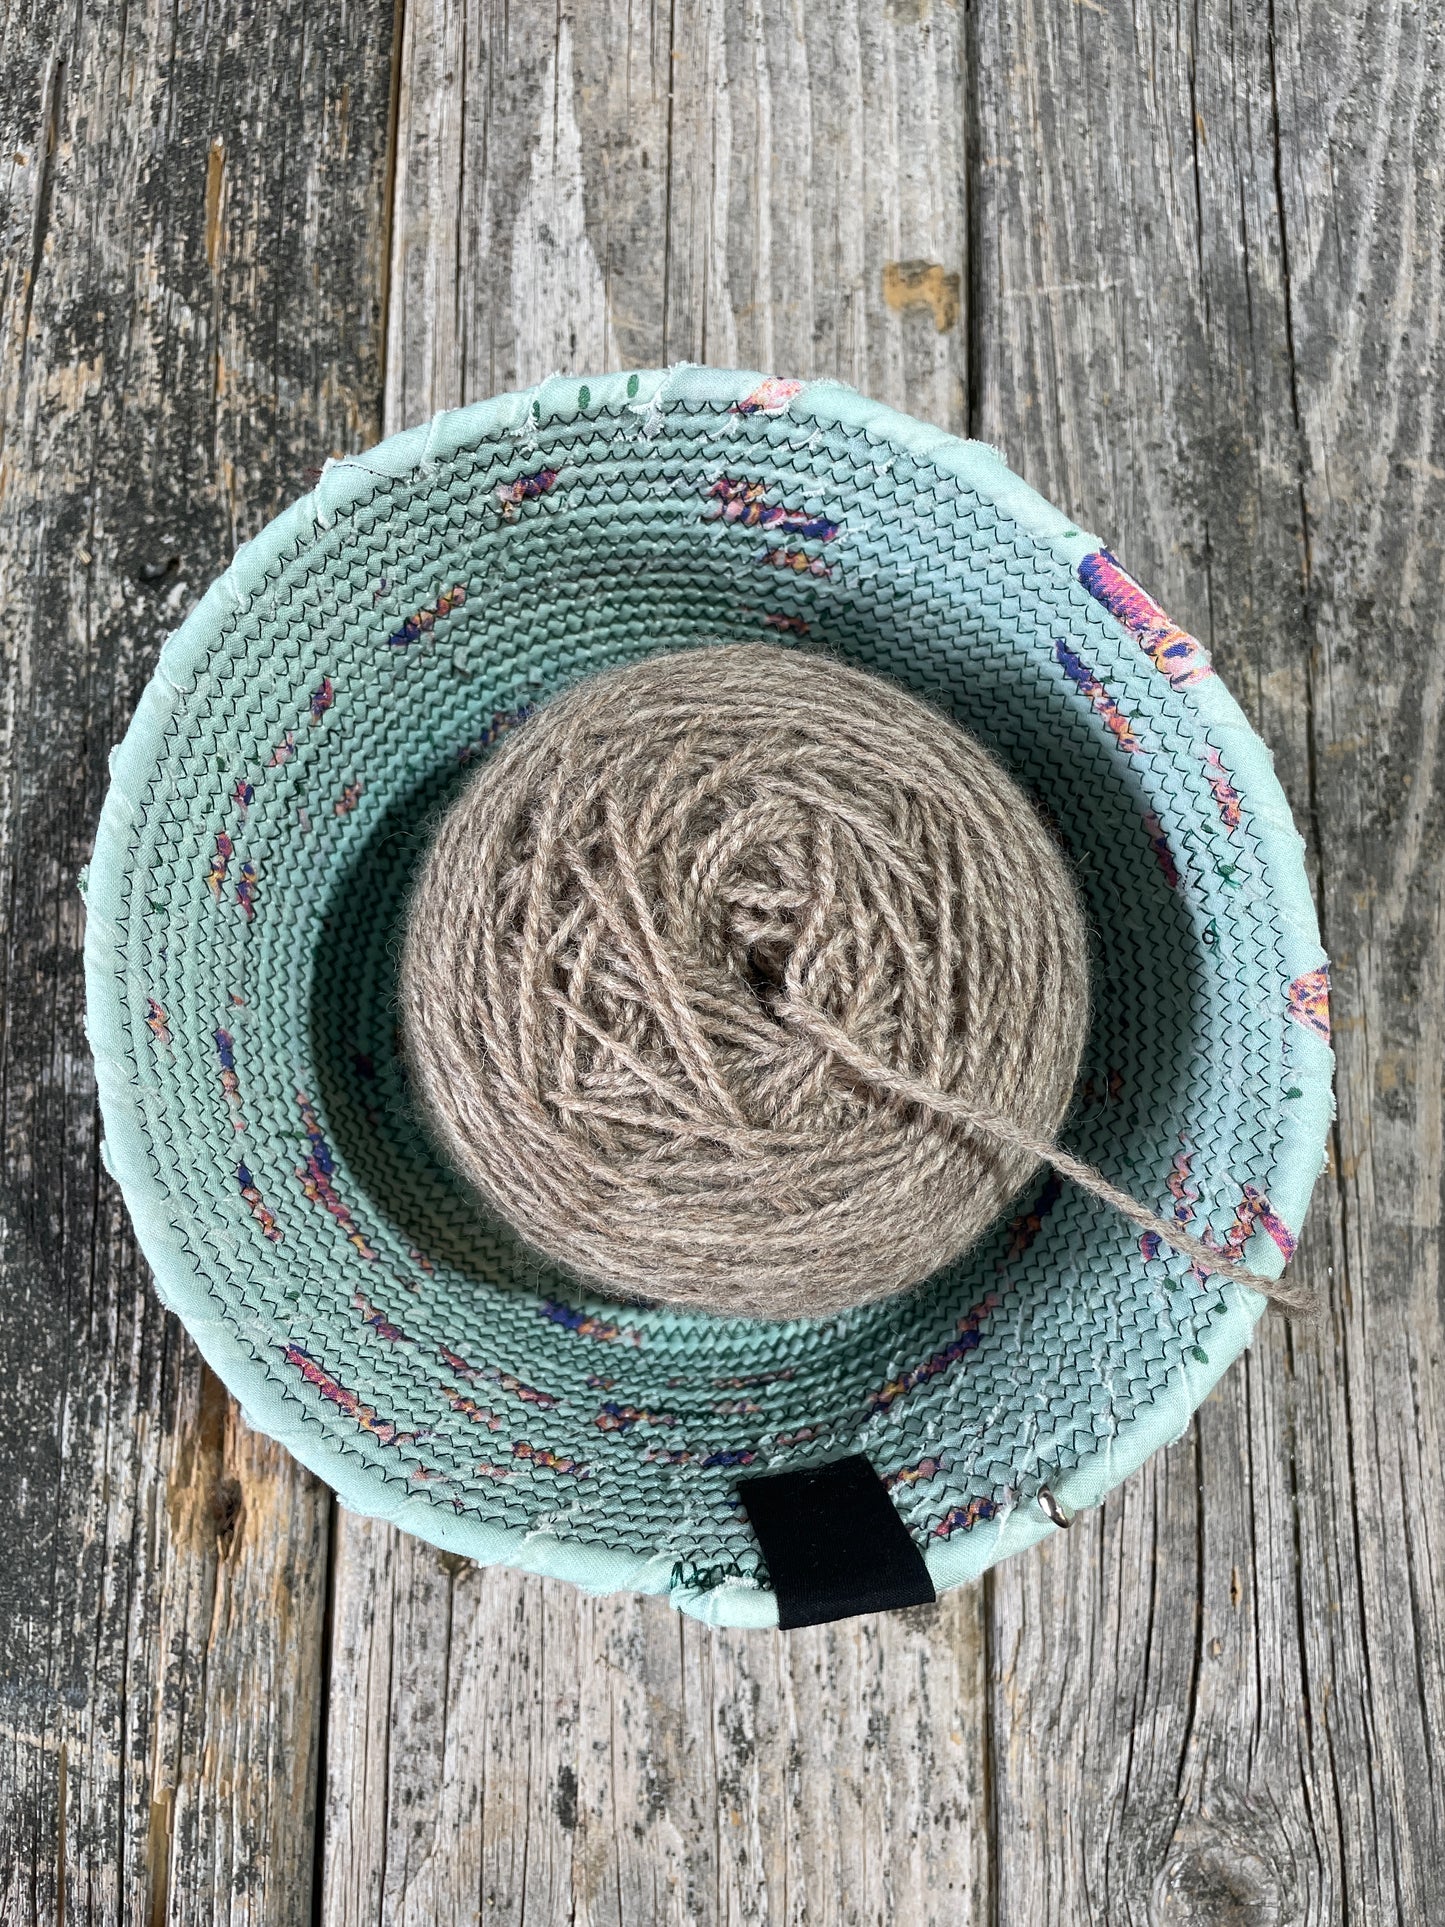 Frozen Custard - Handmade Fabric/Rope Project Bowls by TkPomroy/The Wooly Ghost